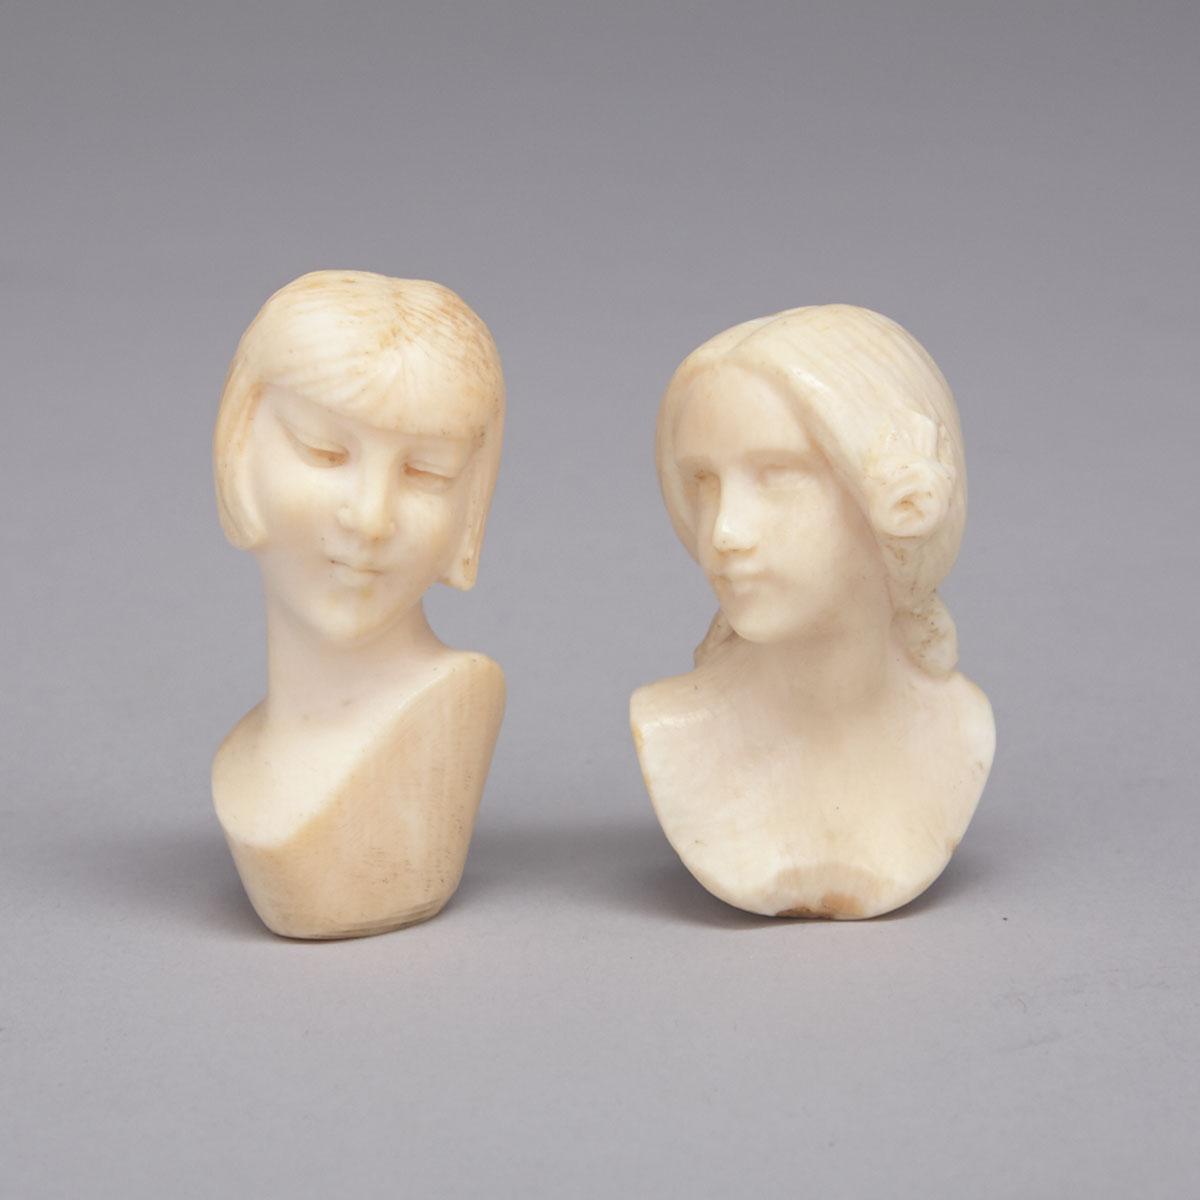 Two Small French Carved Ivory Heads, 19th/20th centuries